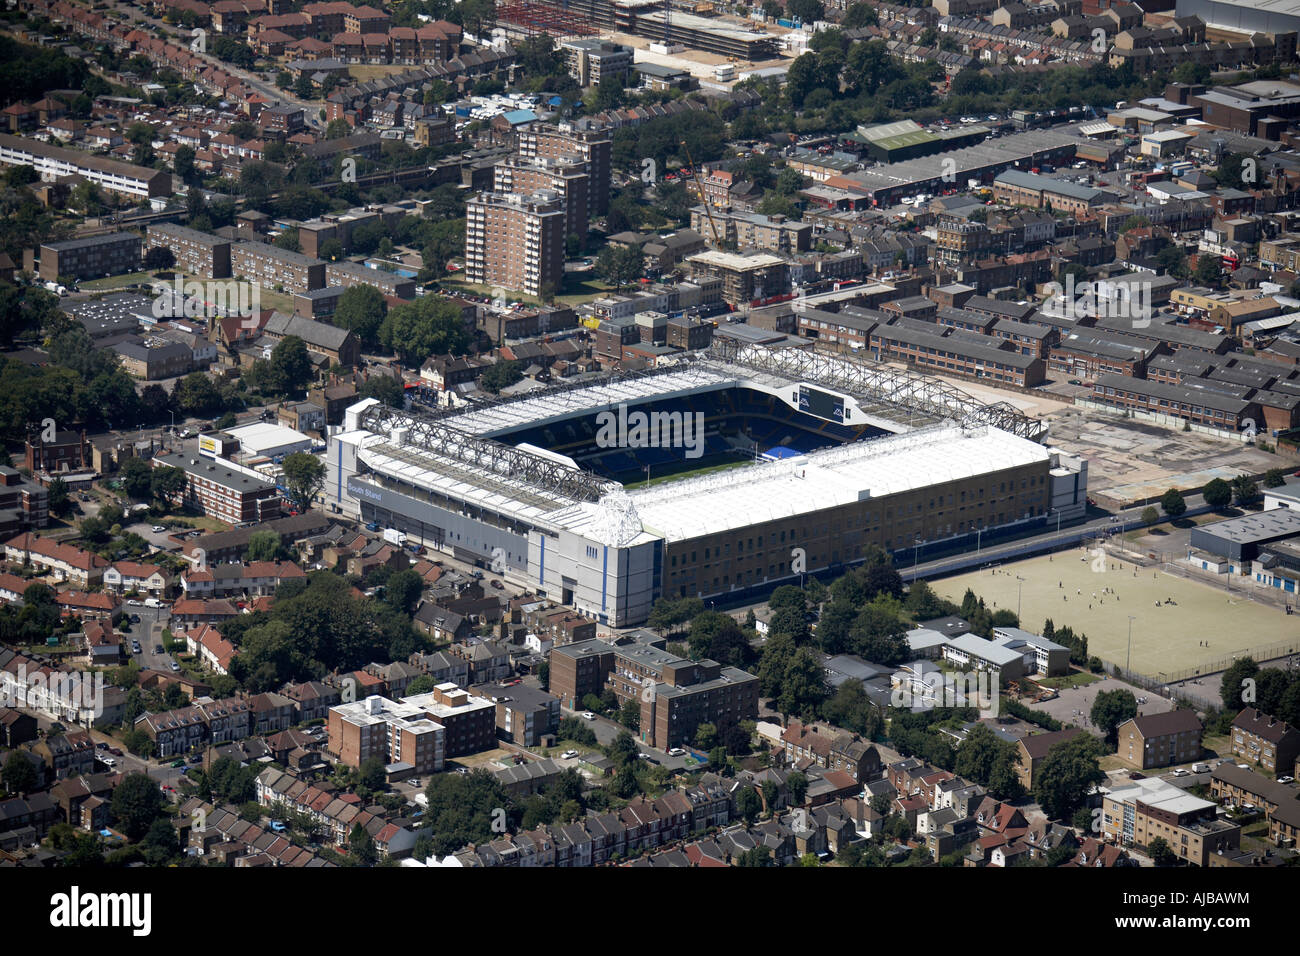 Aerial view north west of White Hart Lane Tottenham Hotspur F C home ground Haringey London N17 England UK High level oblique Stock Photo